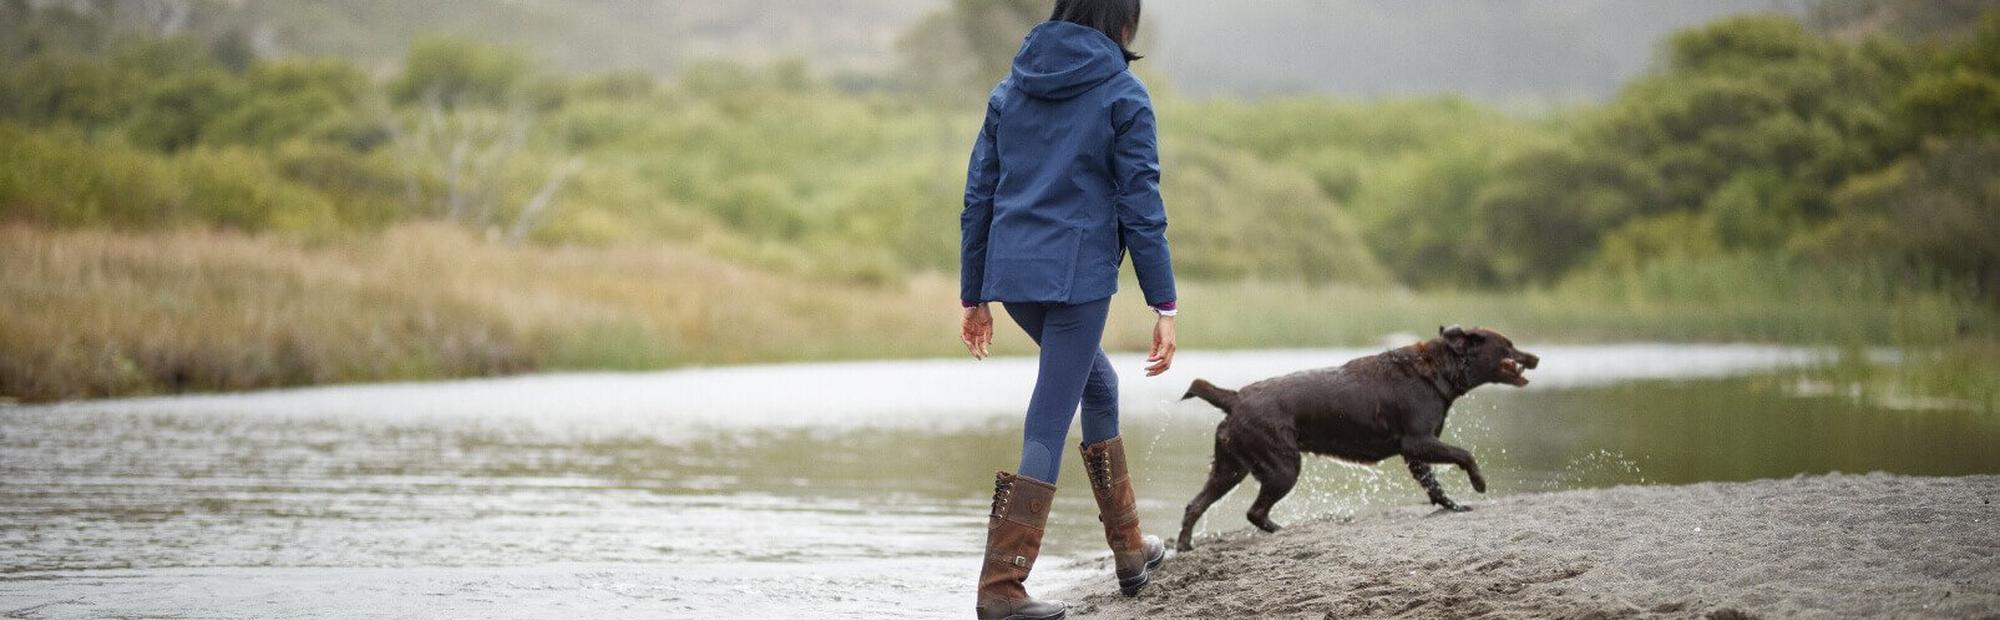 woman walking in water with dog